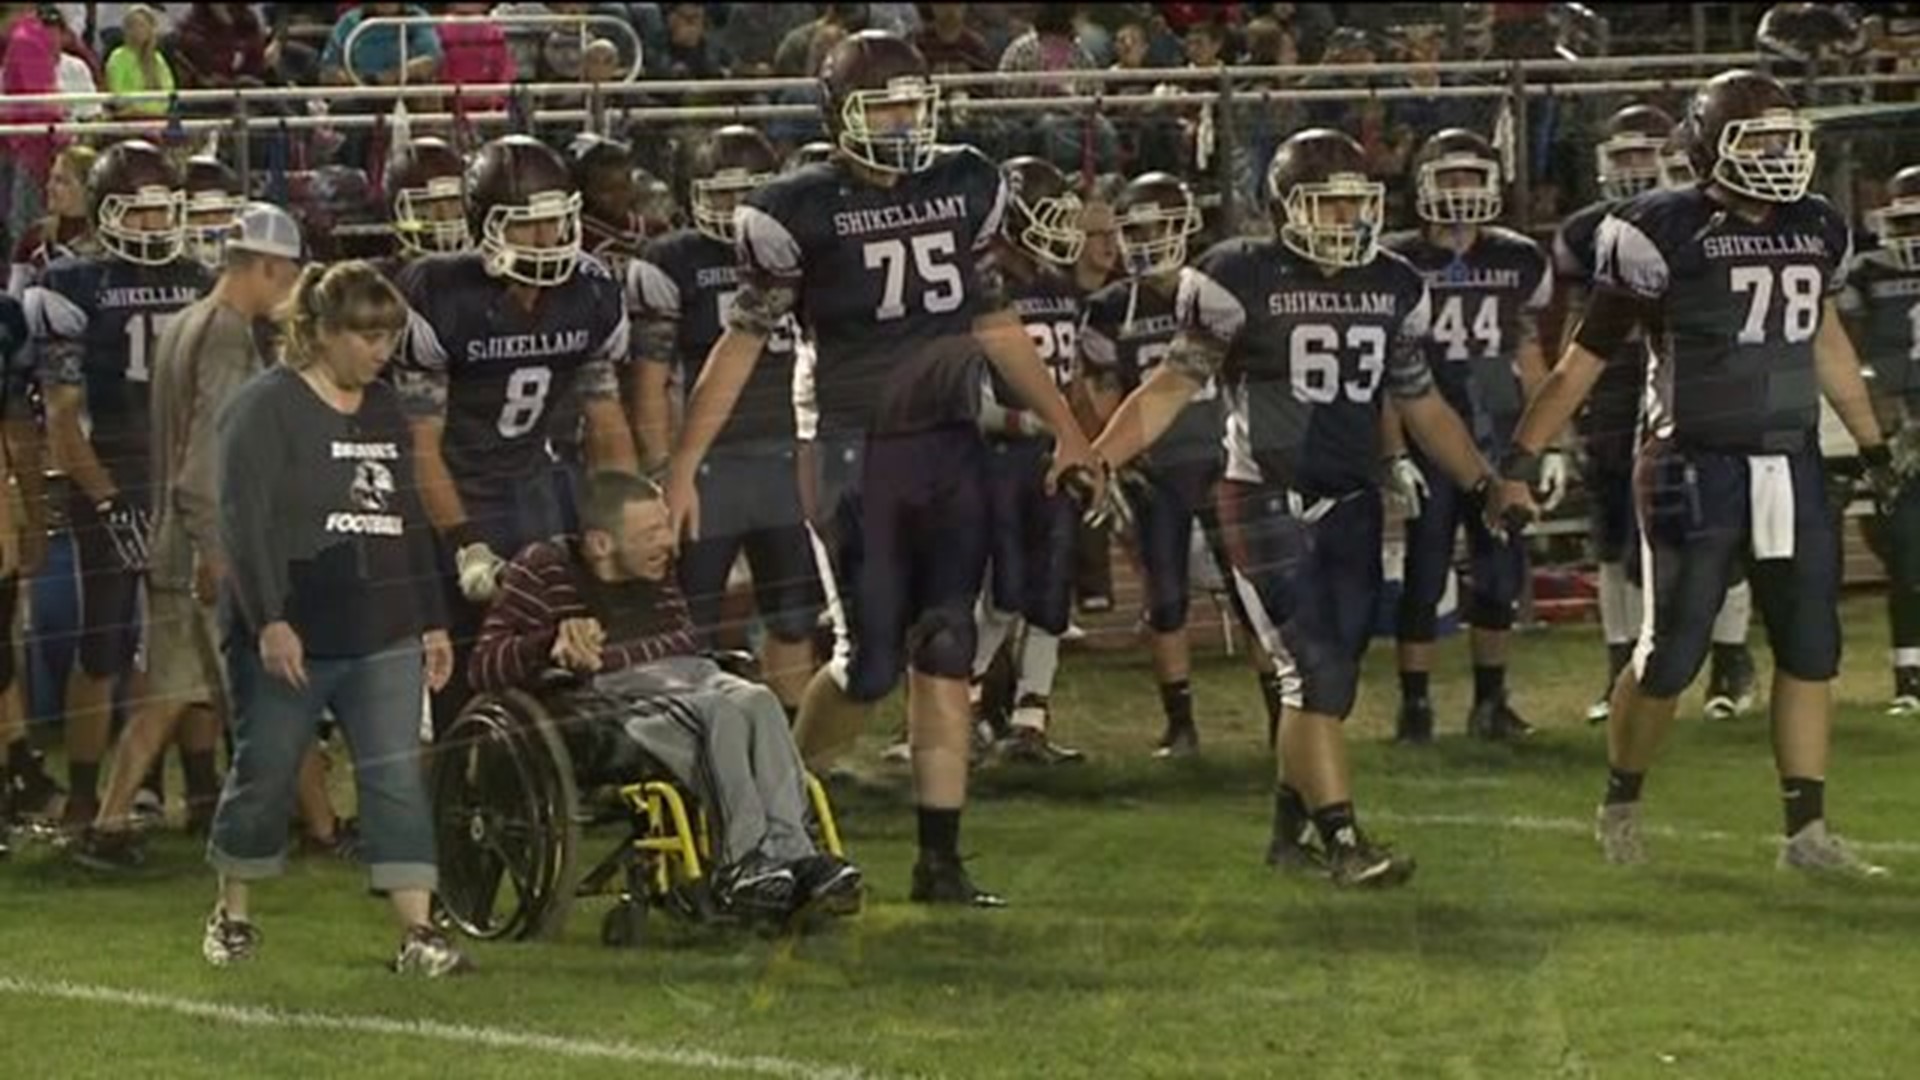 A Special Football Team Co-Captain For Shikellamy